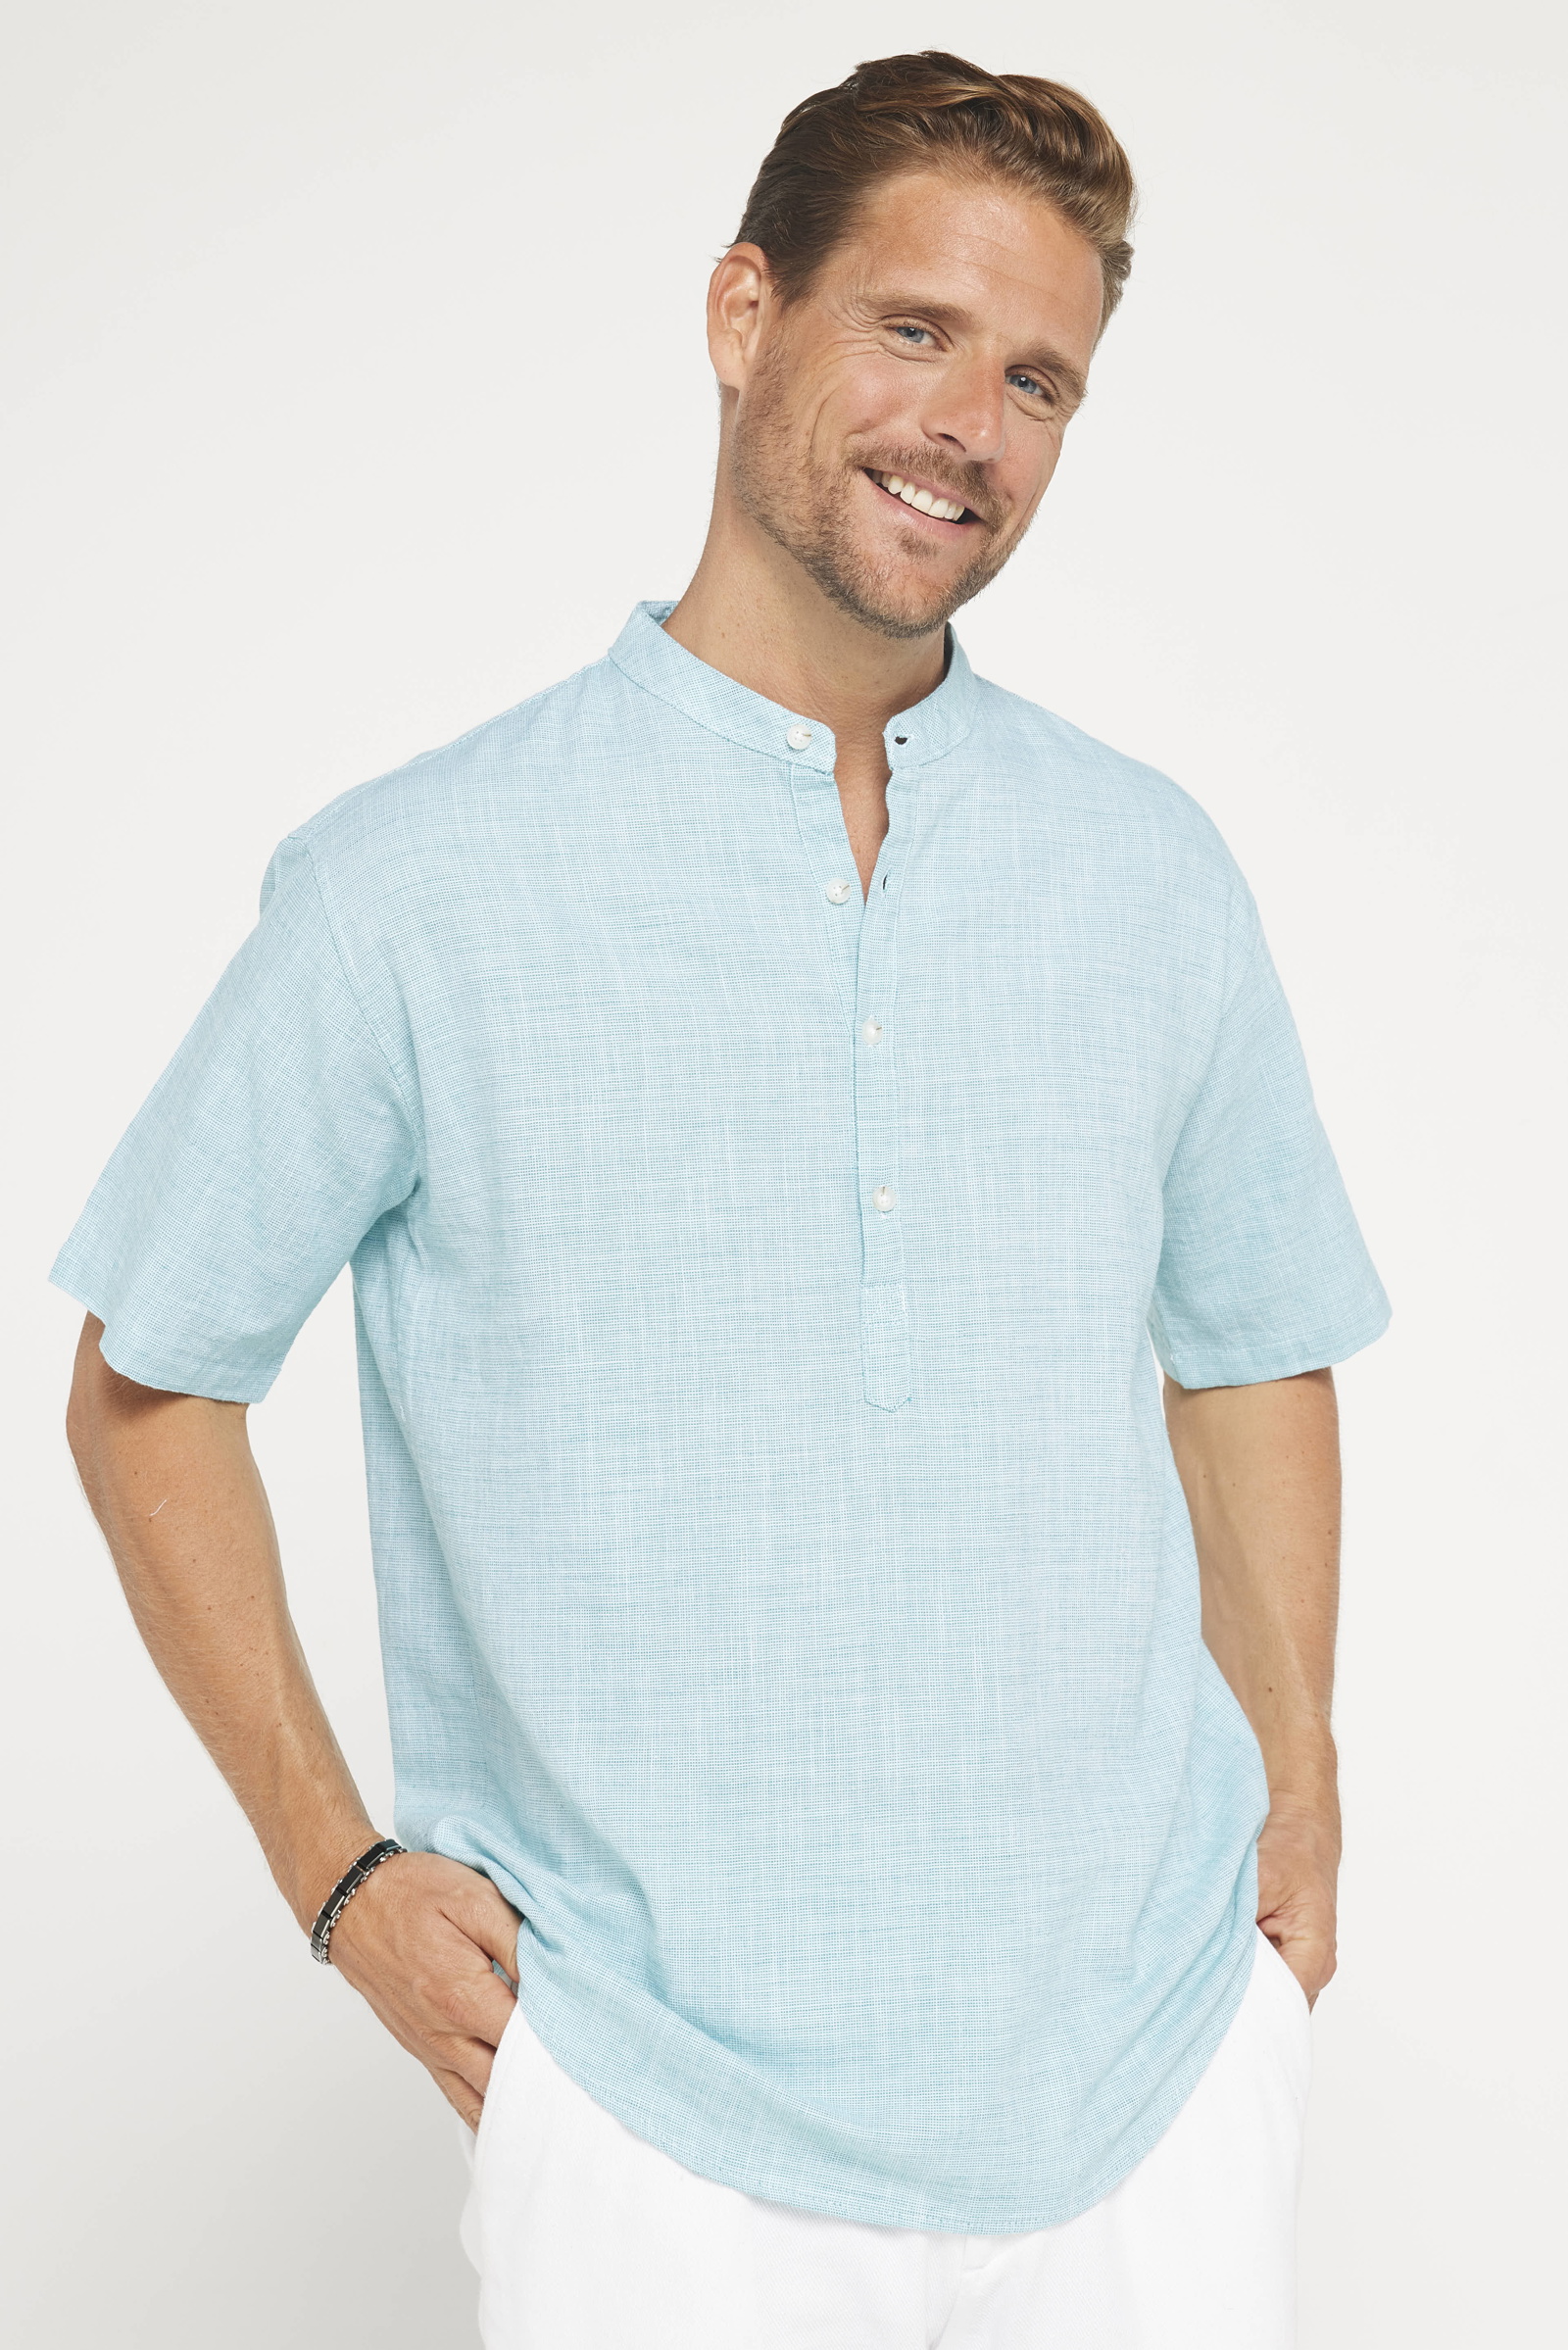 Textured Turquoise Shirt